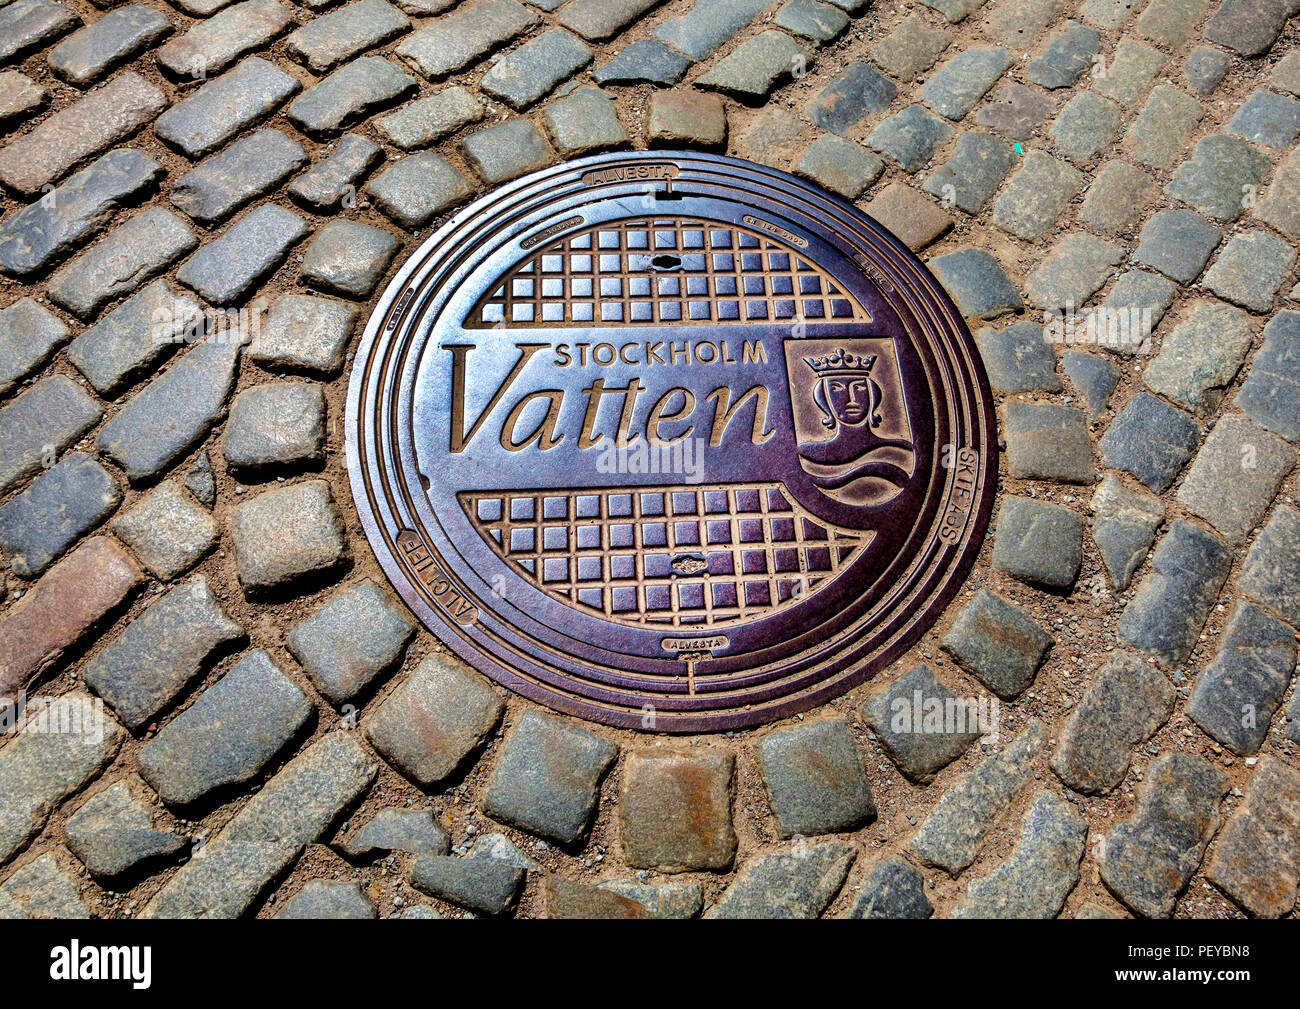 Manhole cover in cobbled street in the Old Town area of Stockholm. Stockholm Vatten AB is a water and waste management company in Sweden. Stock Photo